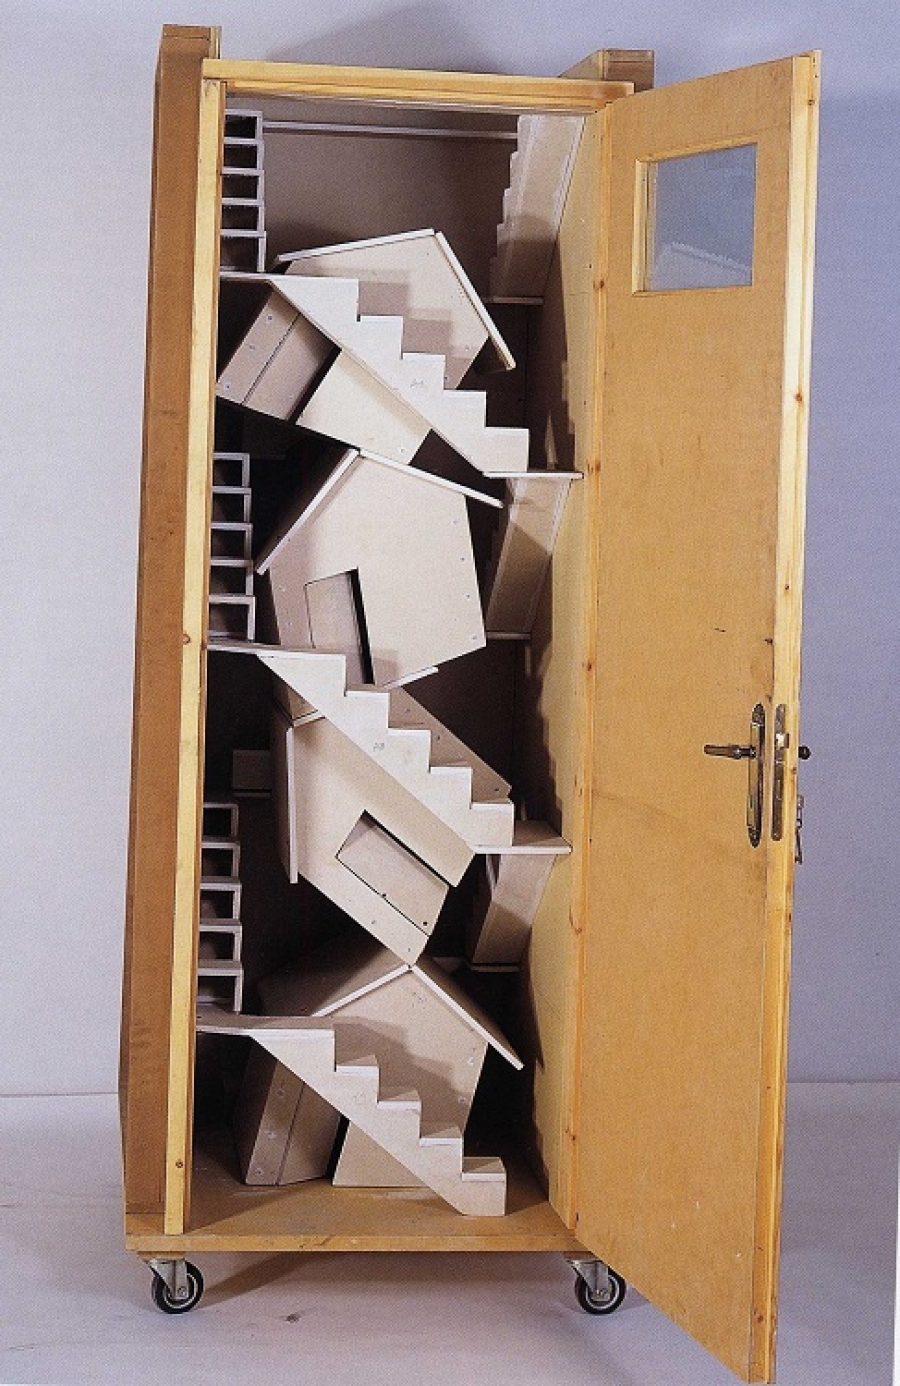 [DAY 39] Dimitris Kozaris, Homes and Spiral Staircases, 2002